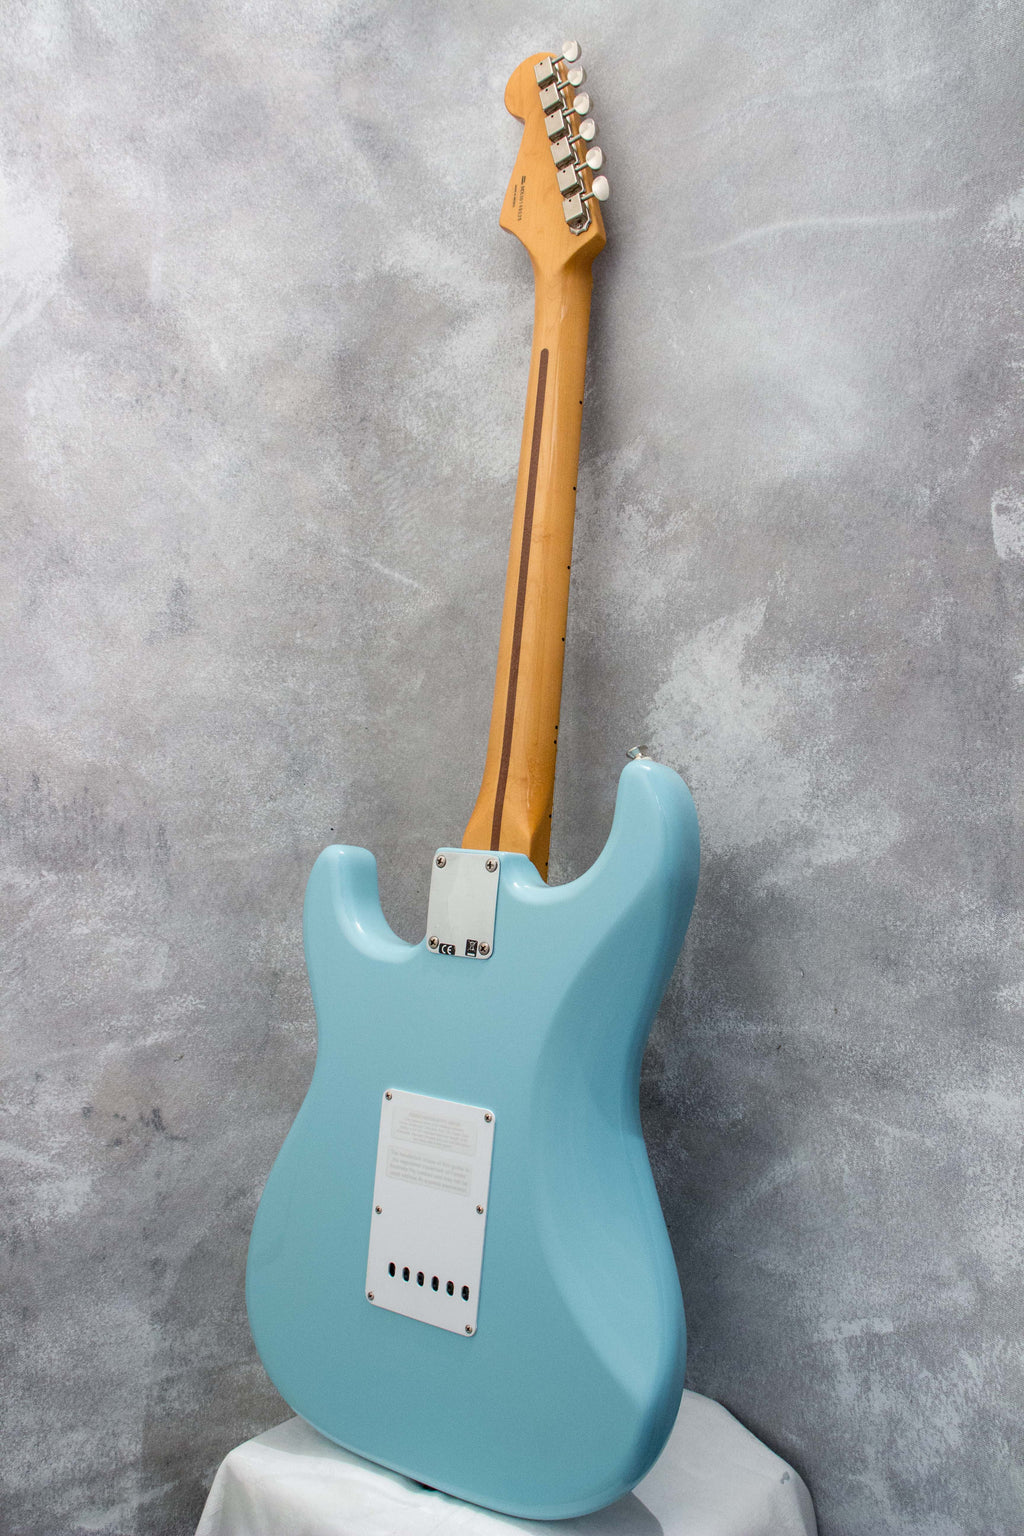 Fender Classic Series 50s Stratocaster Sonic Blue 2010